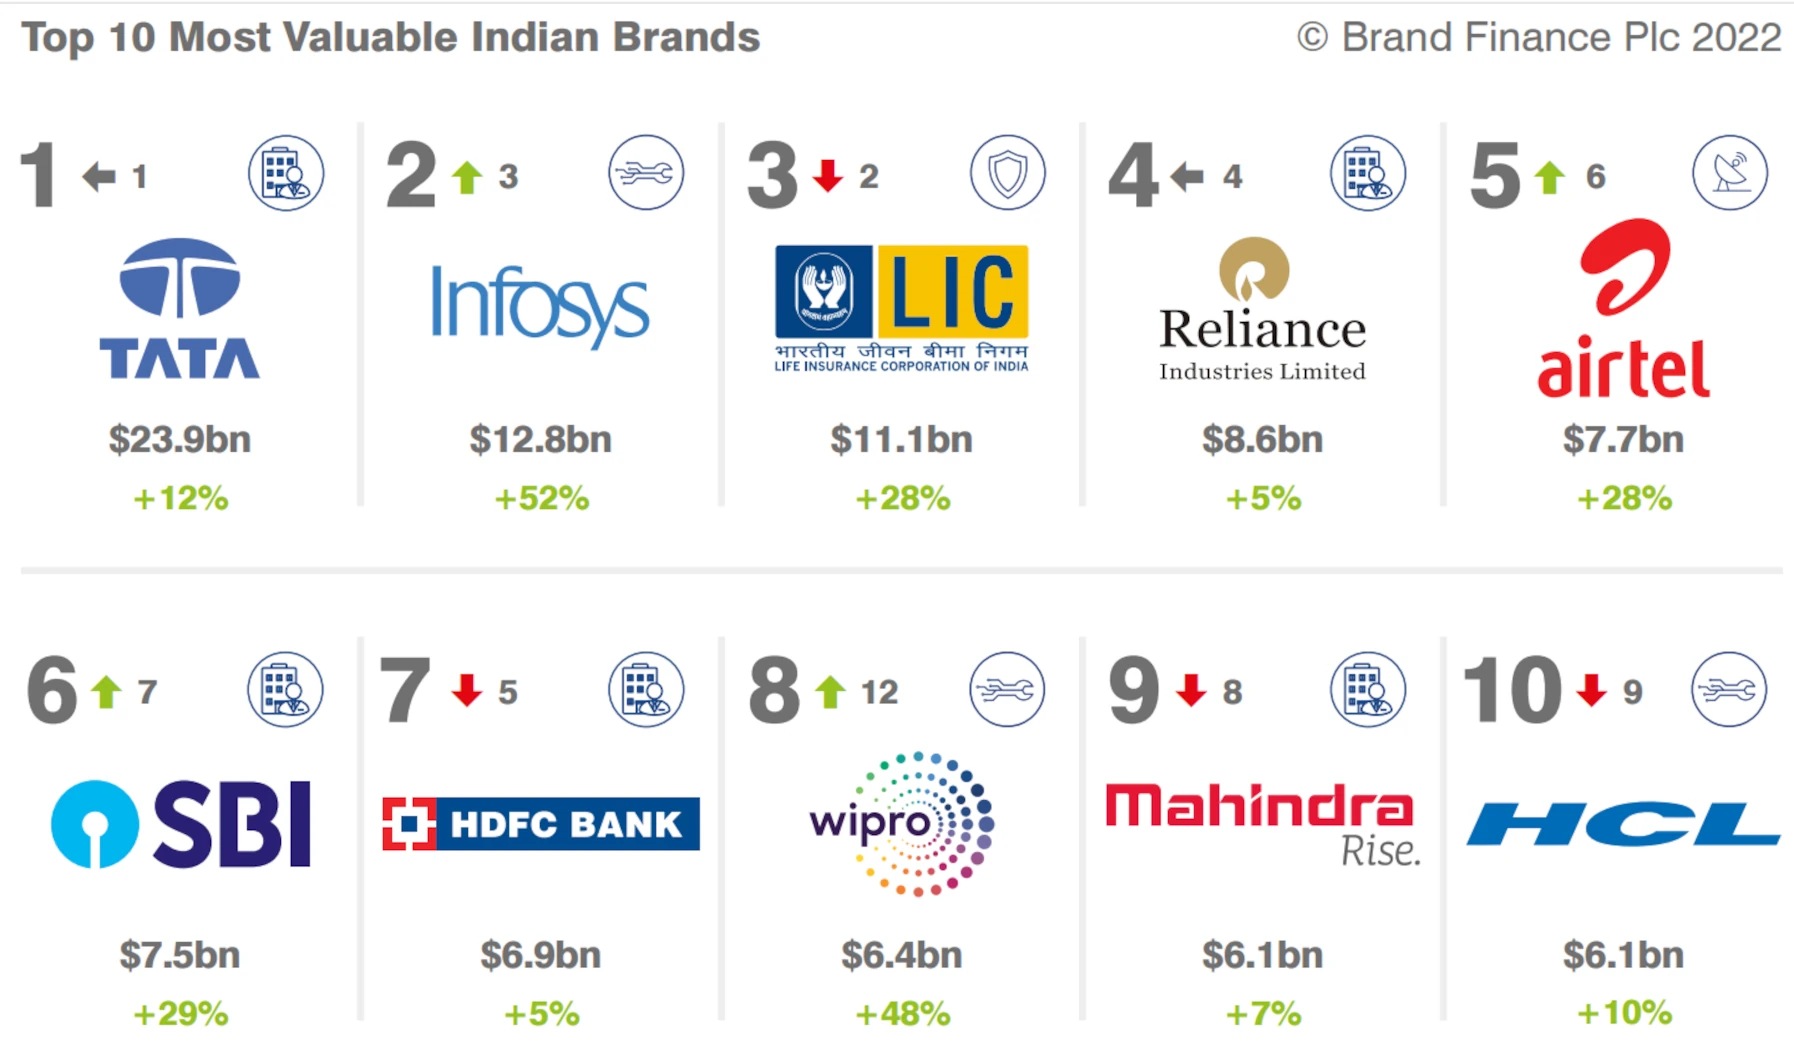 Top 10 Valuable Brands of India in 2022